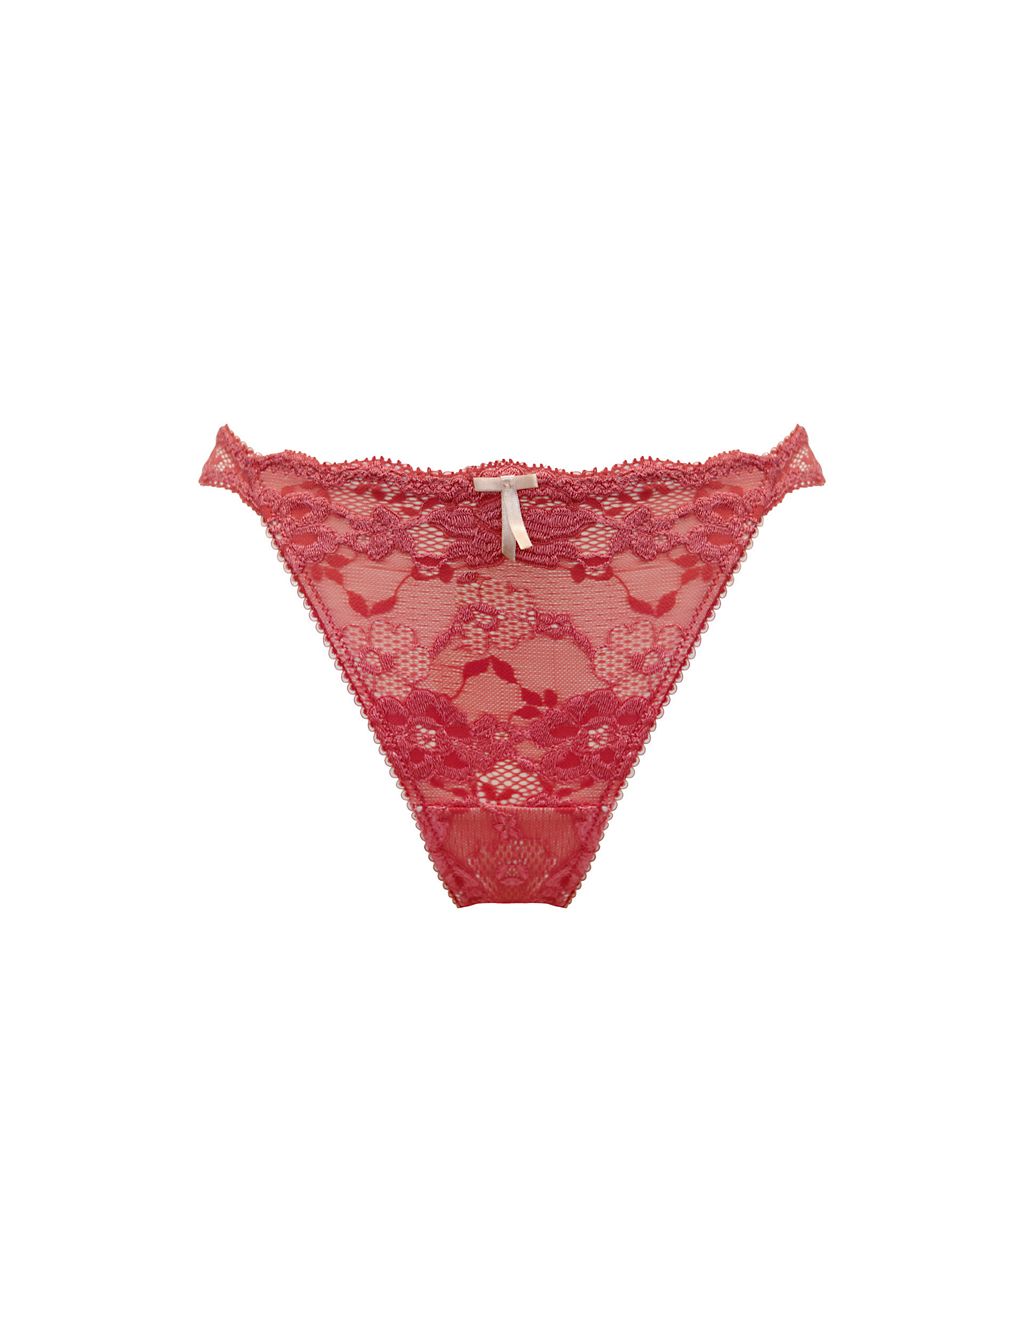 Amour Lace Brazilian Knickers 1 of 5